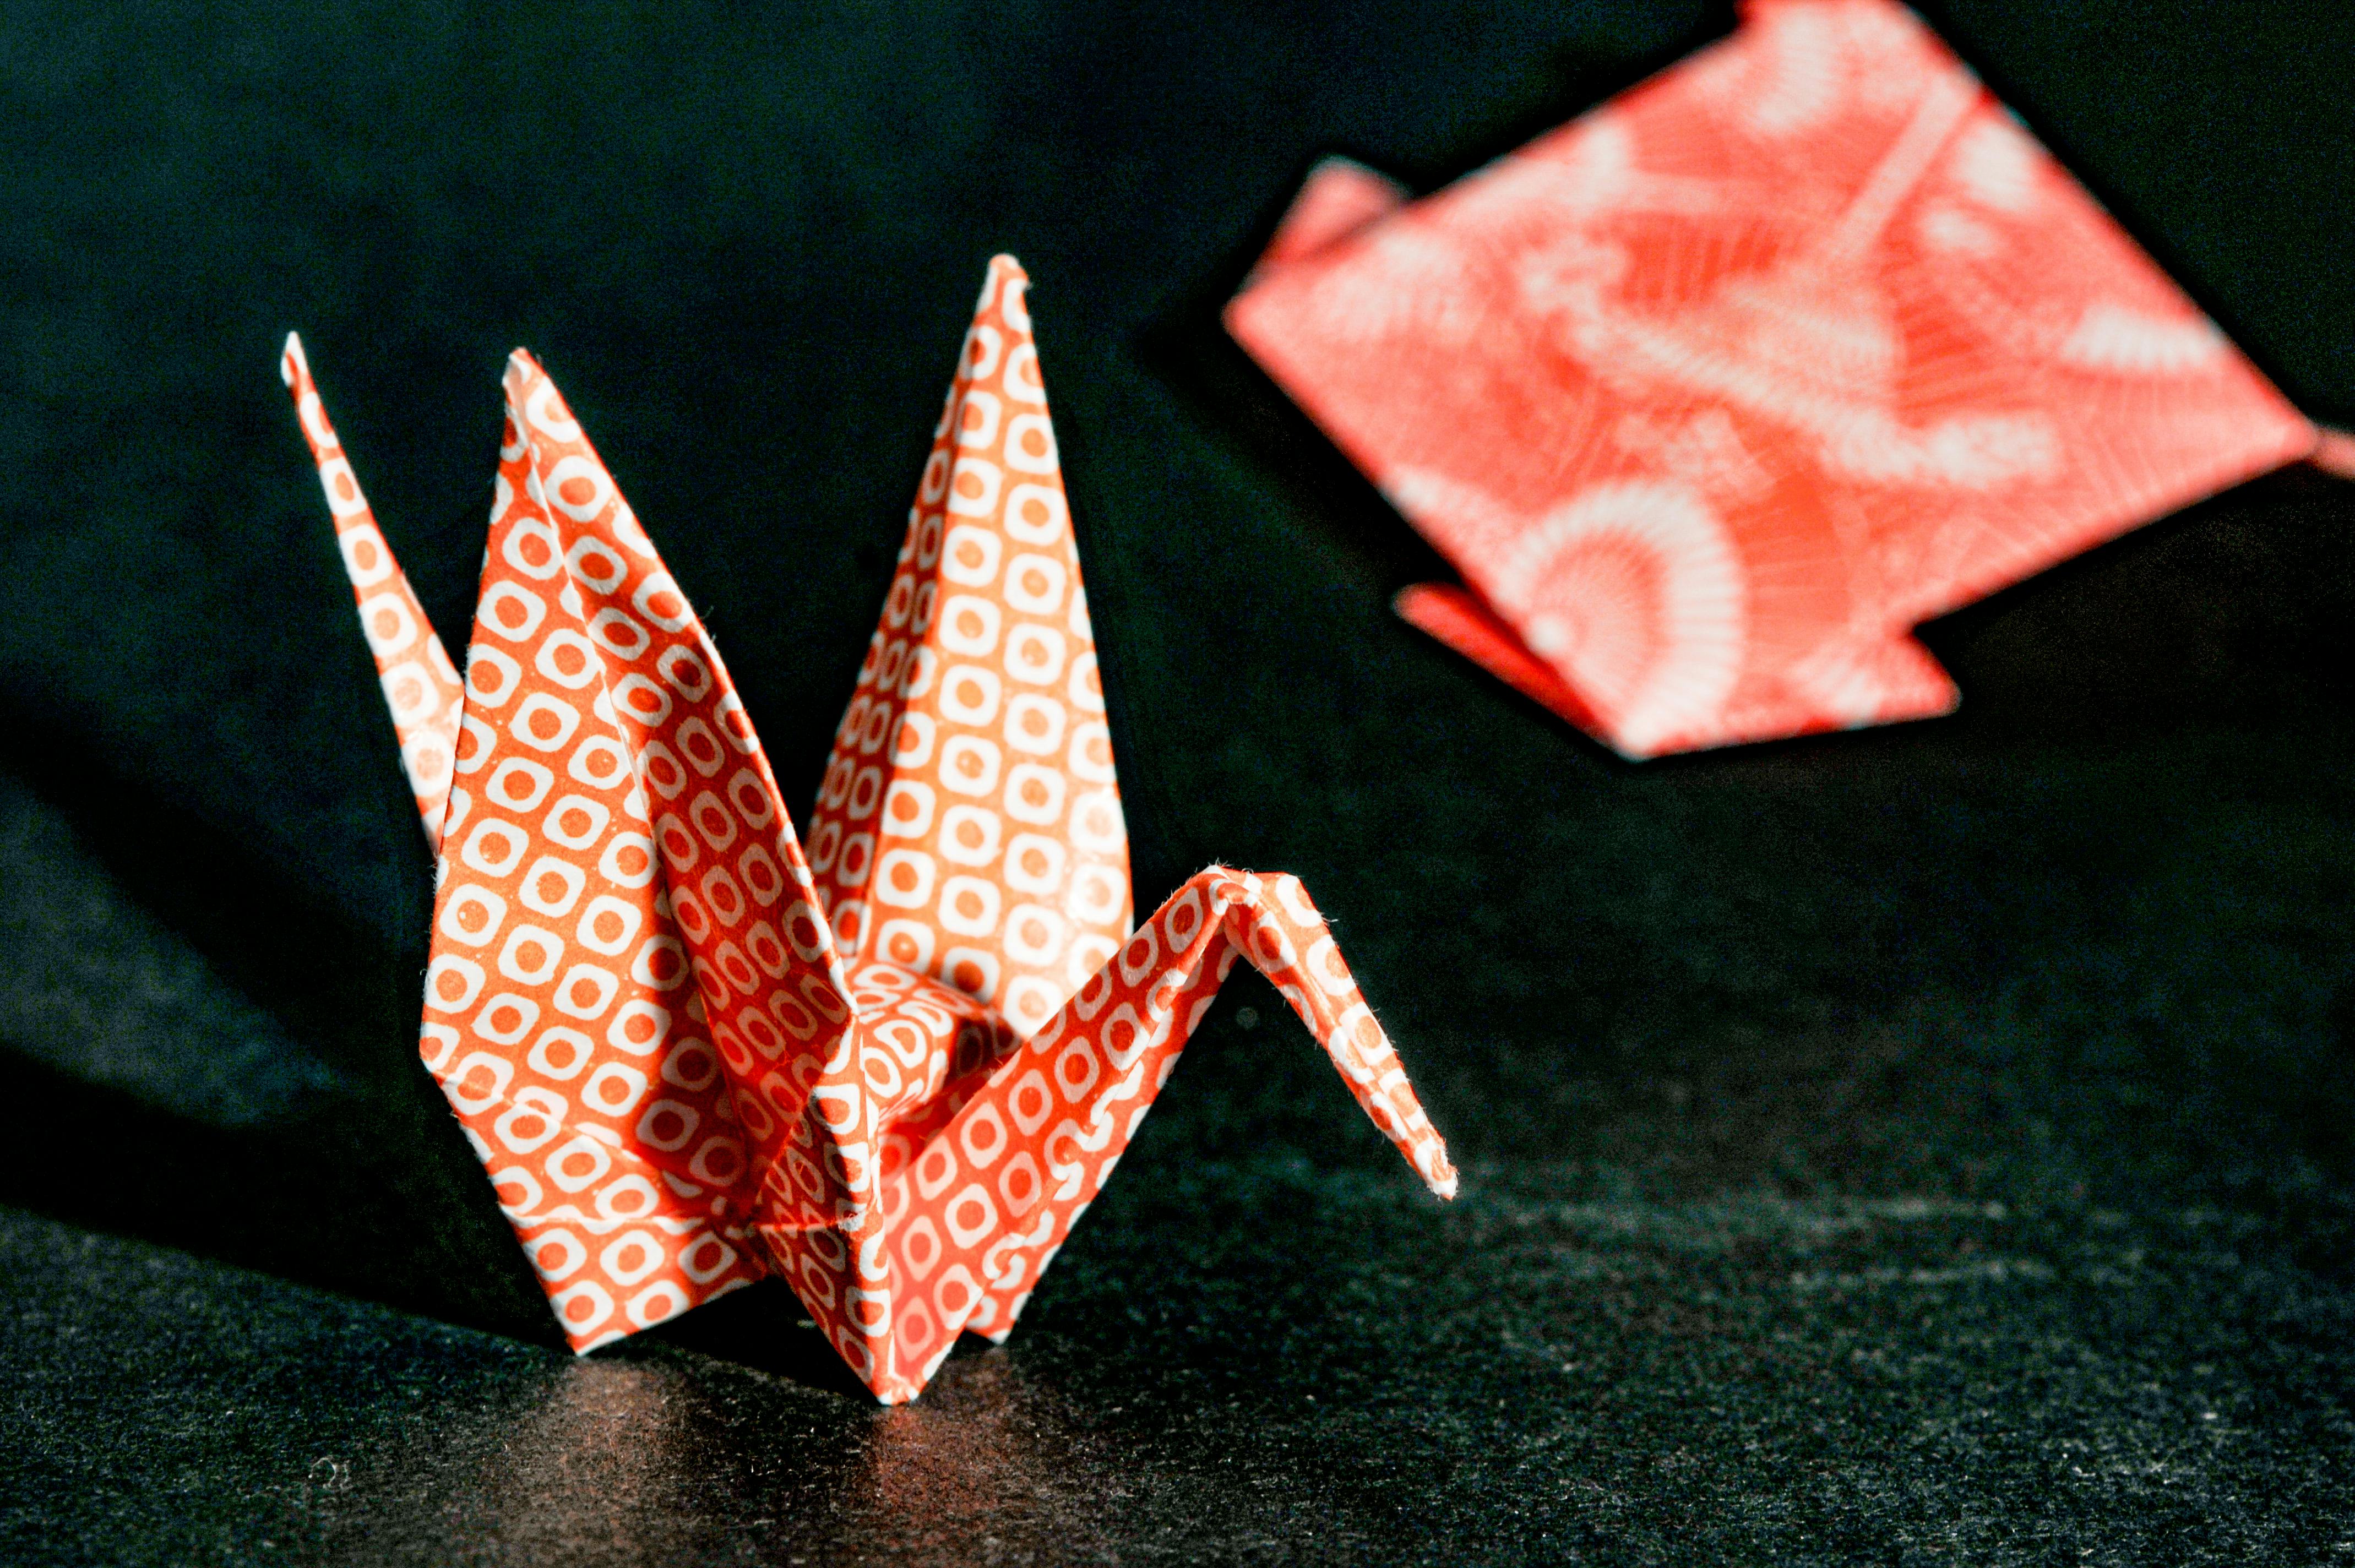 Collage of different origami papers close-up Stock Photo by